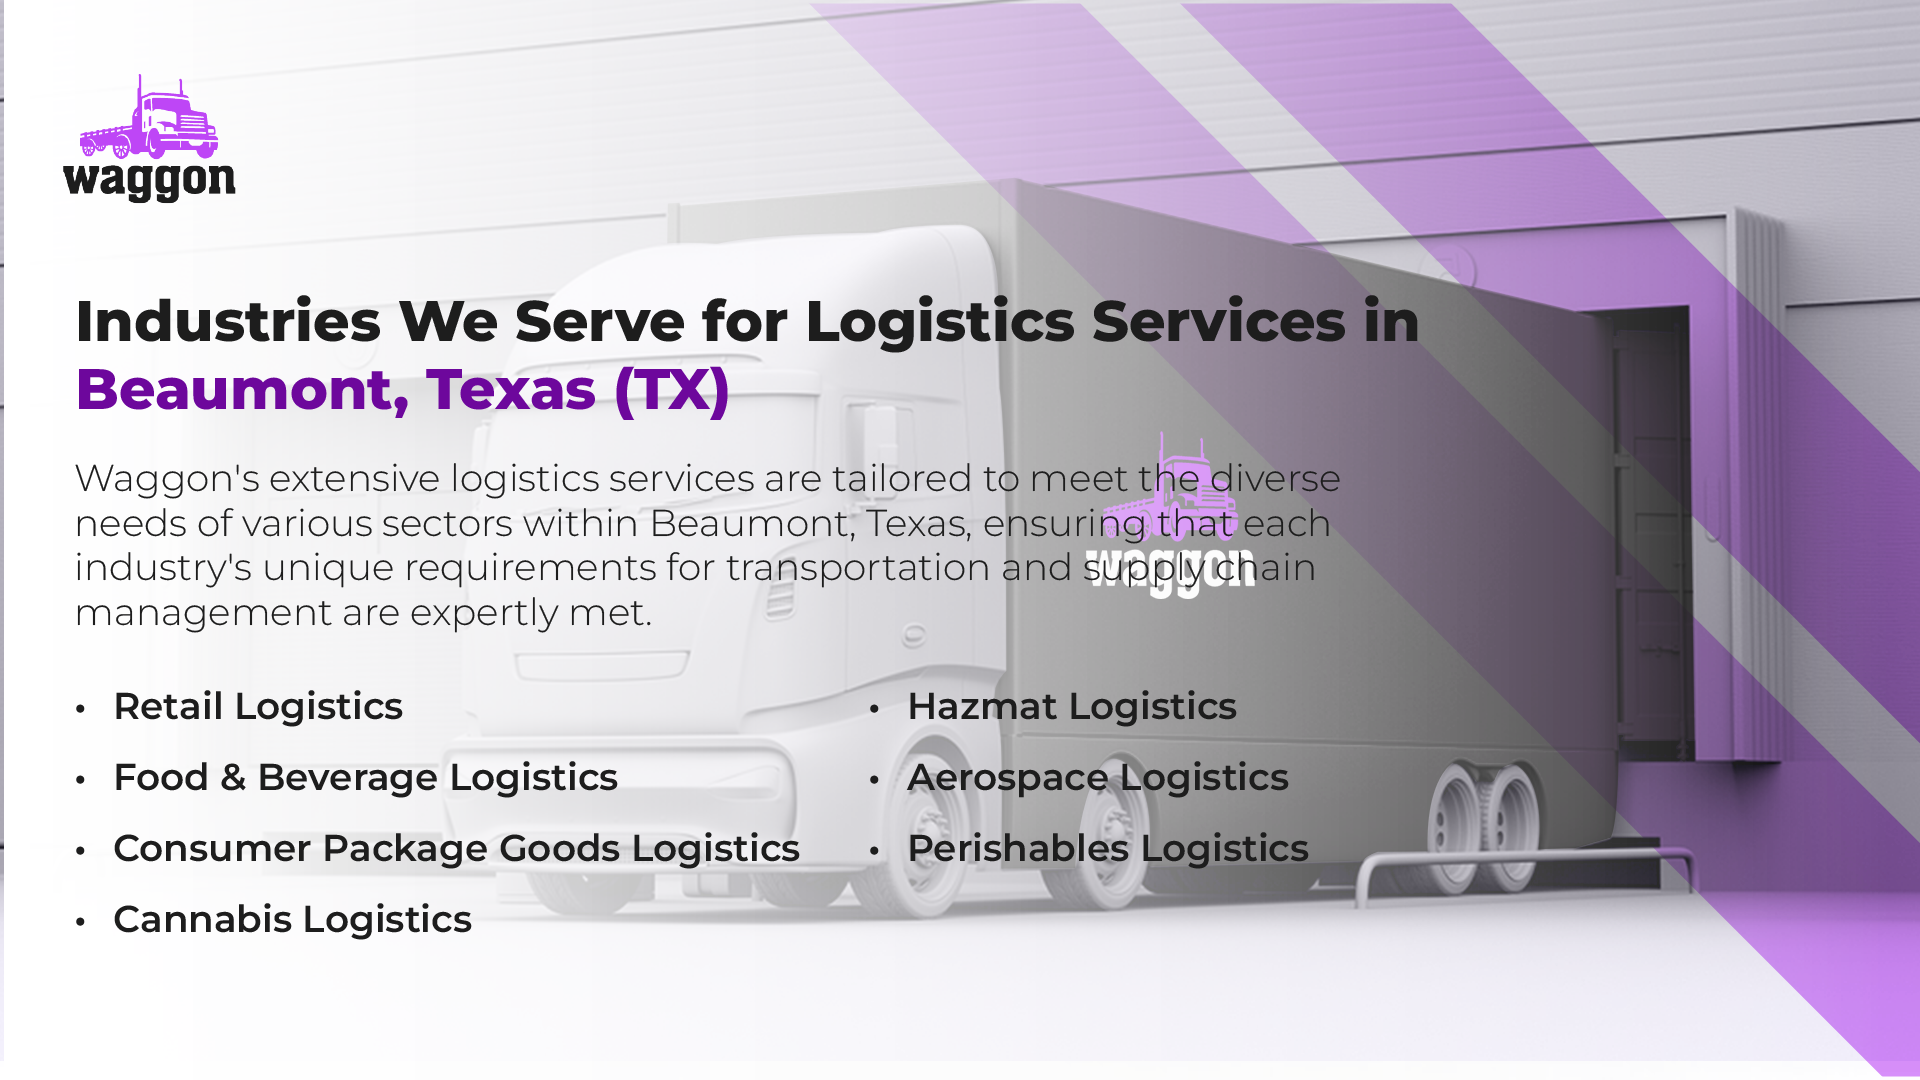 Industries We Serve for Logistics Services in Beaumont, Texas (TX)